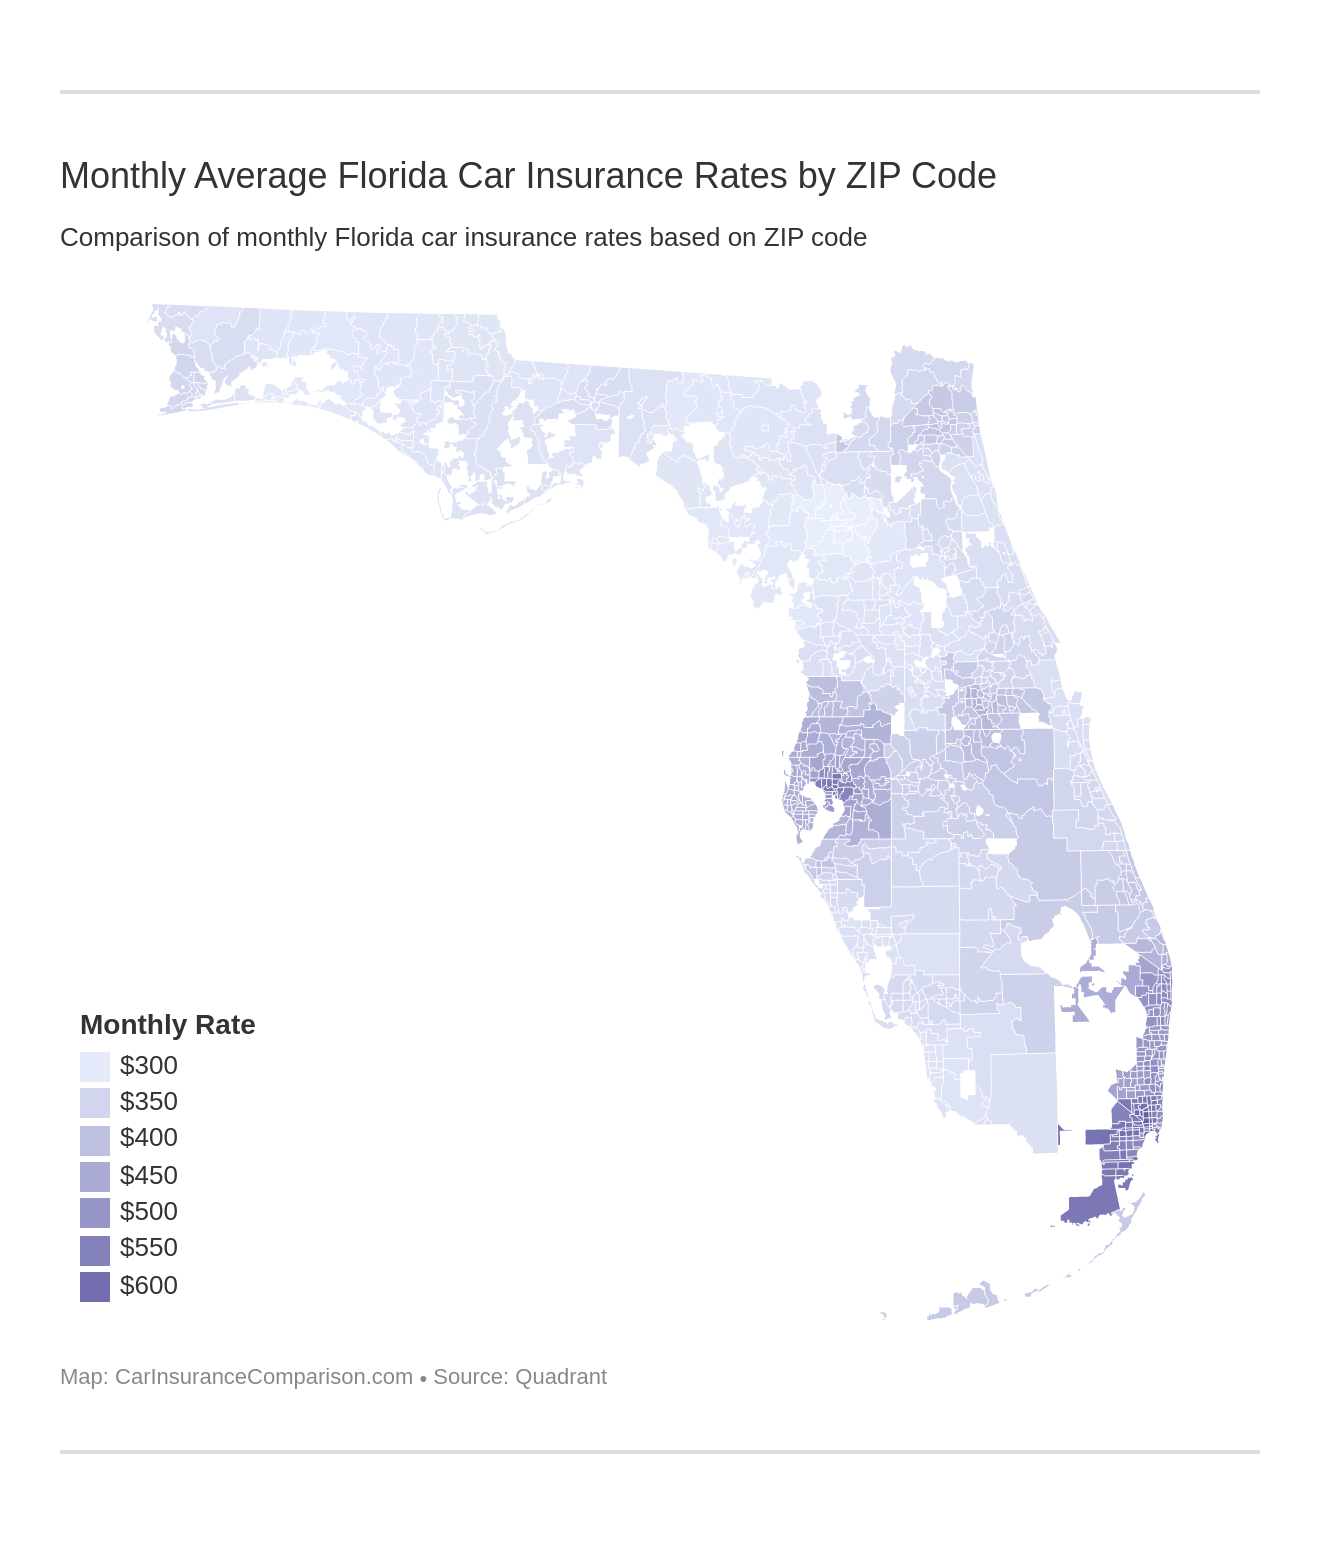 Monthly Average Florida Car Insurance Rates by ZIP Code